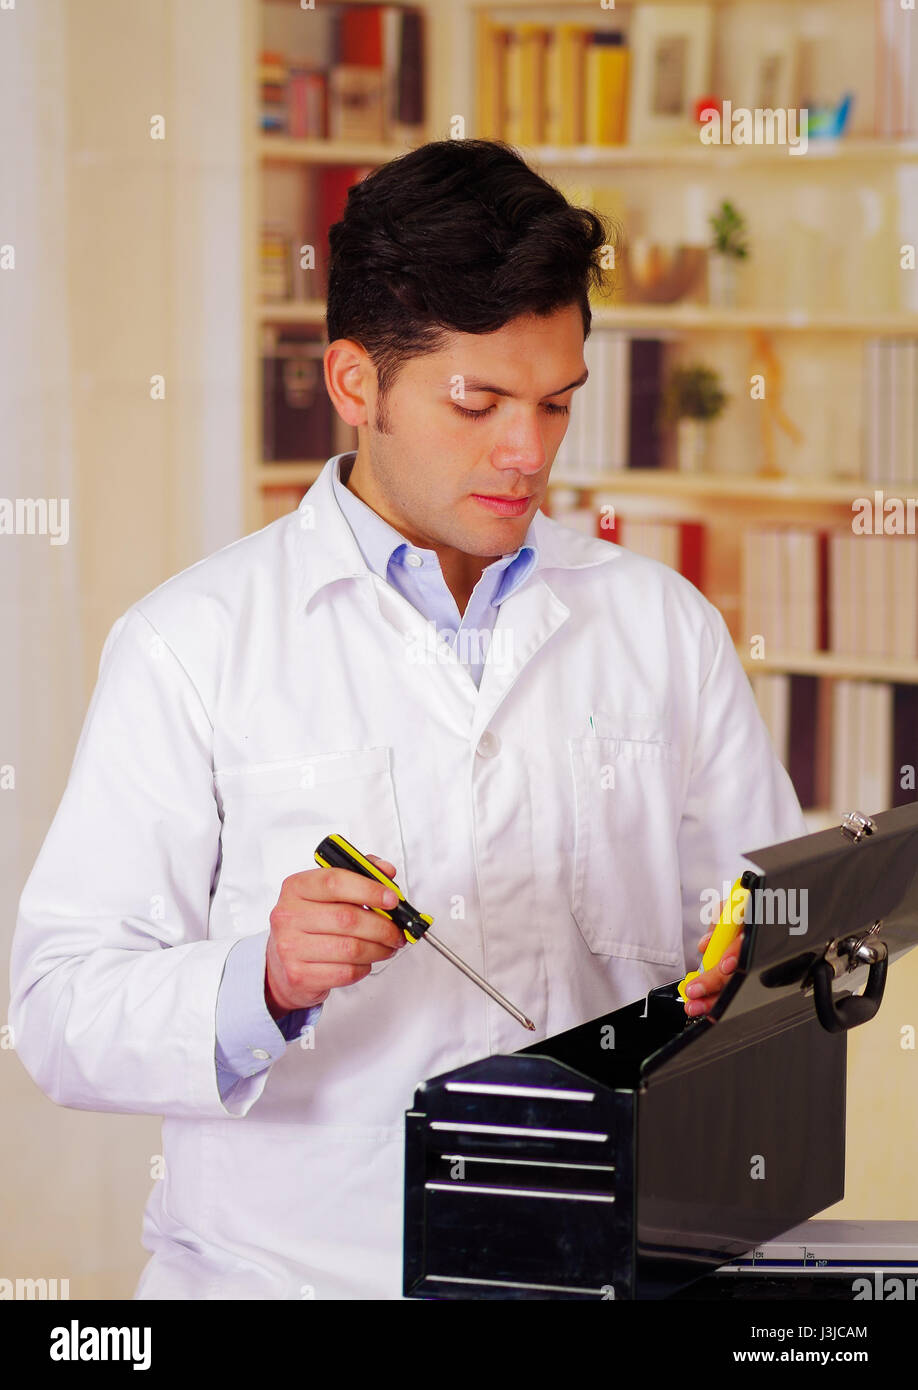 Hardworking Man apen a black tool box and holding a screwdriver in his hand. Stock Photo